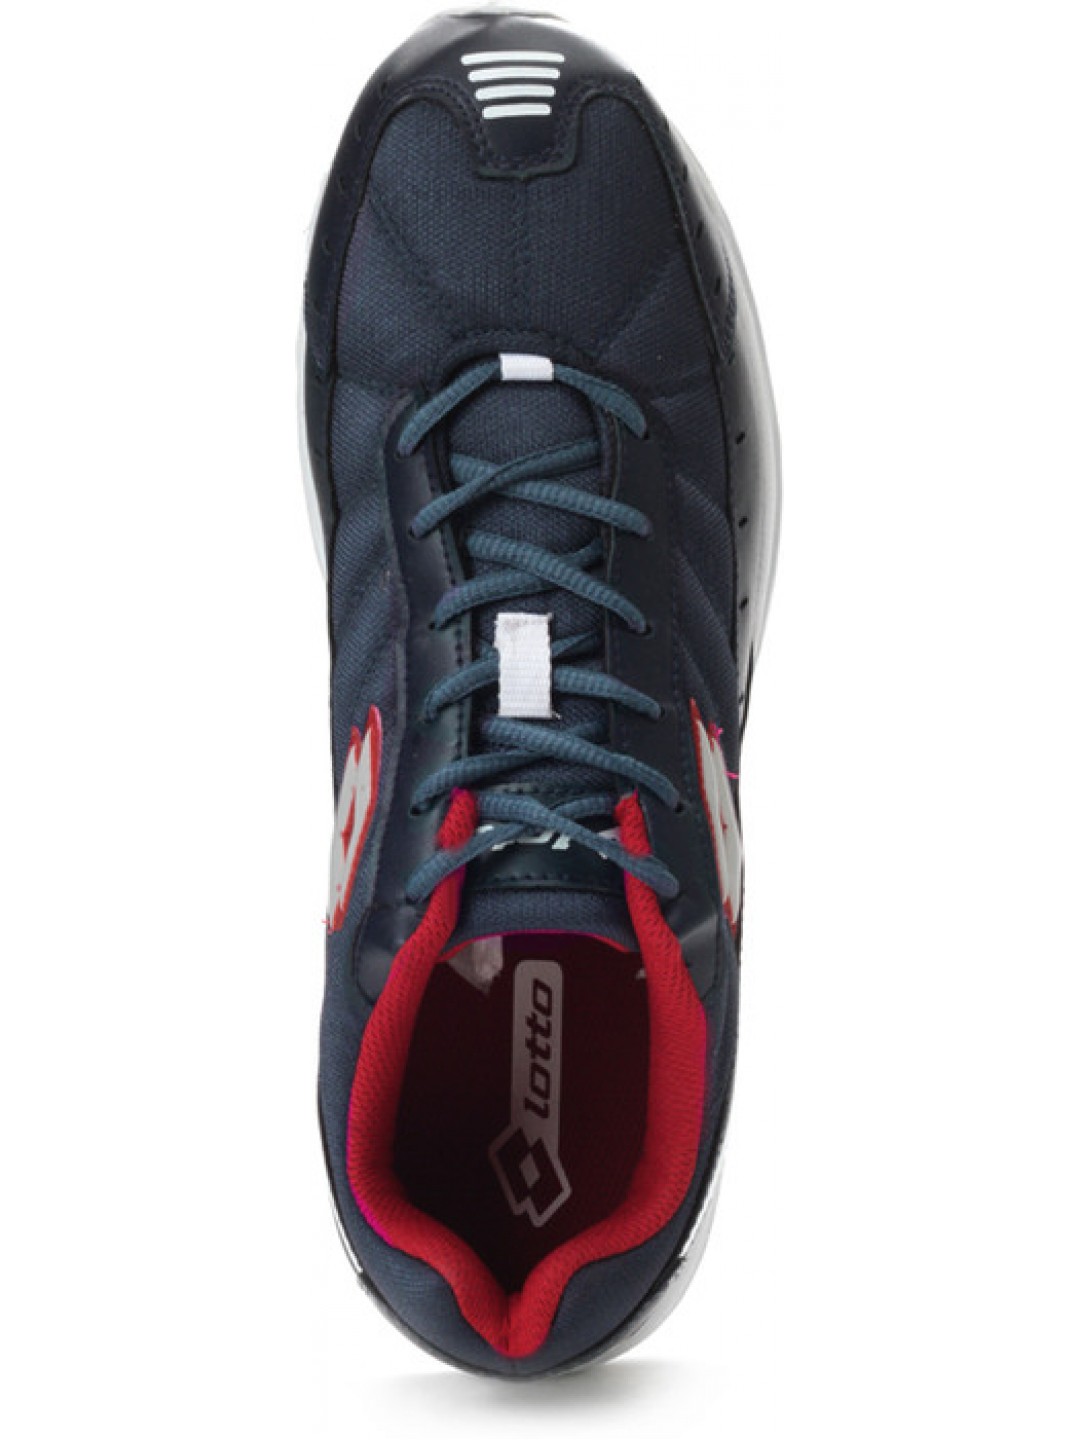 Lotto Truant Navy Blue Sports Running Shoes